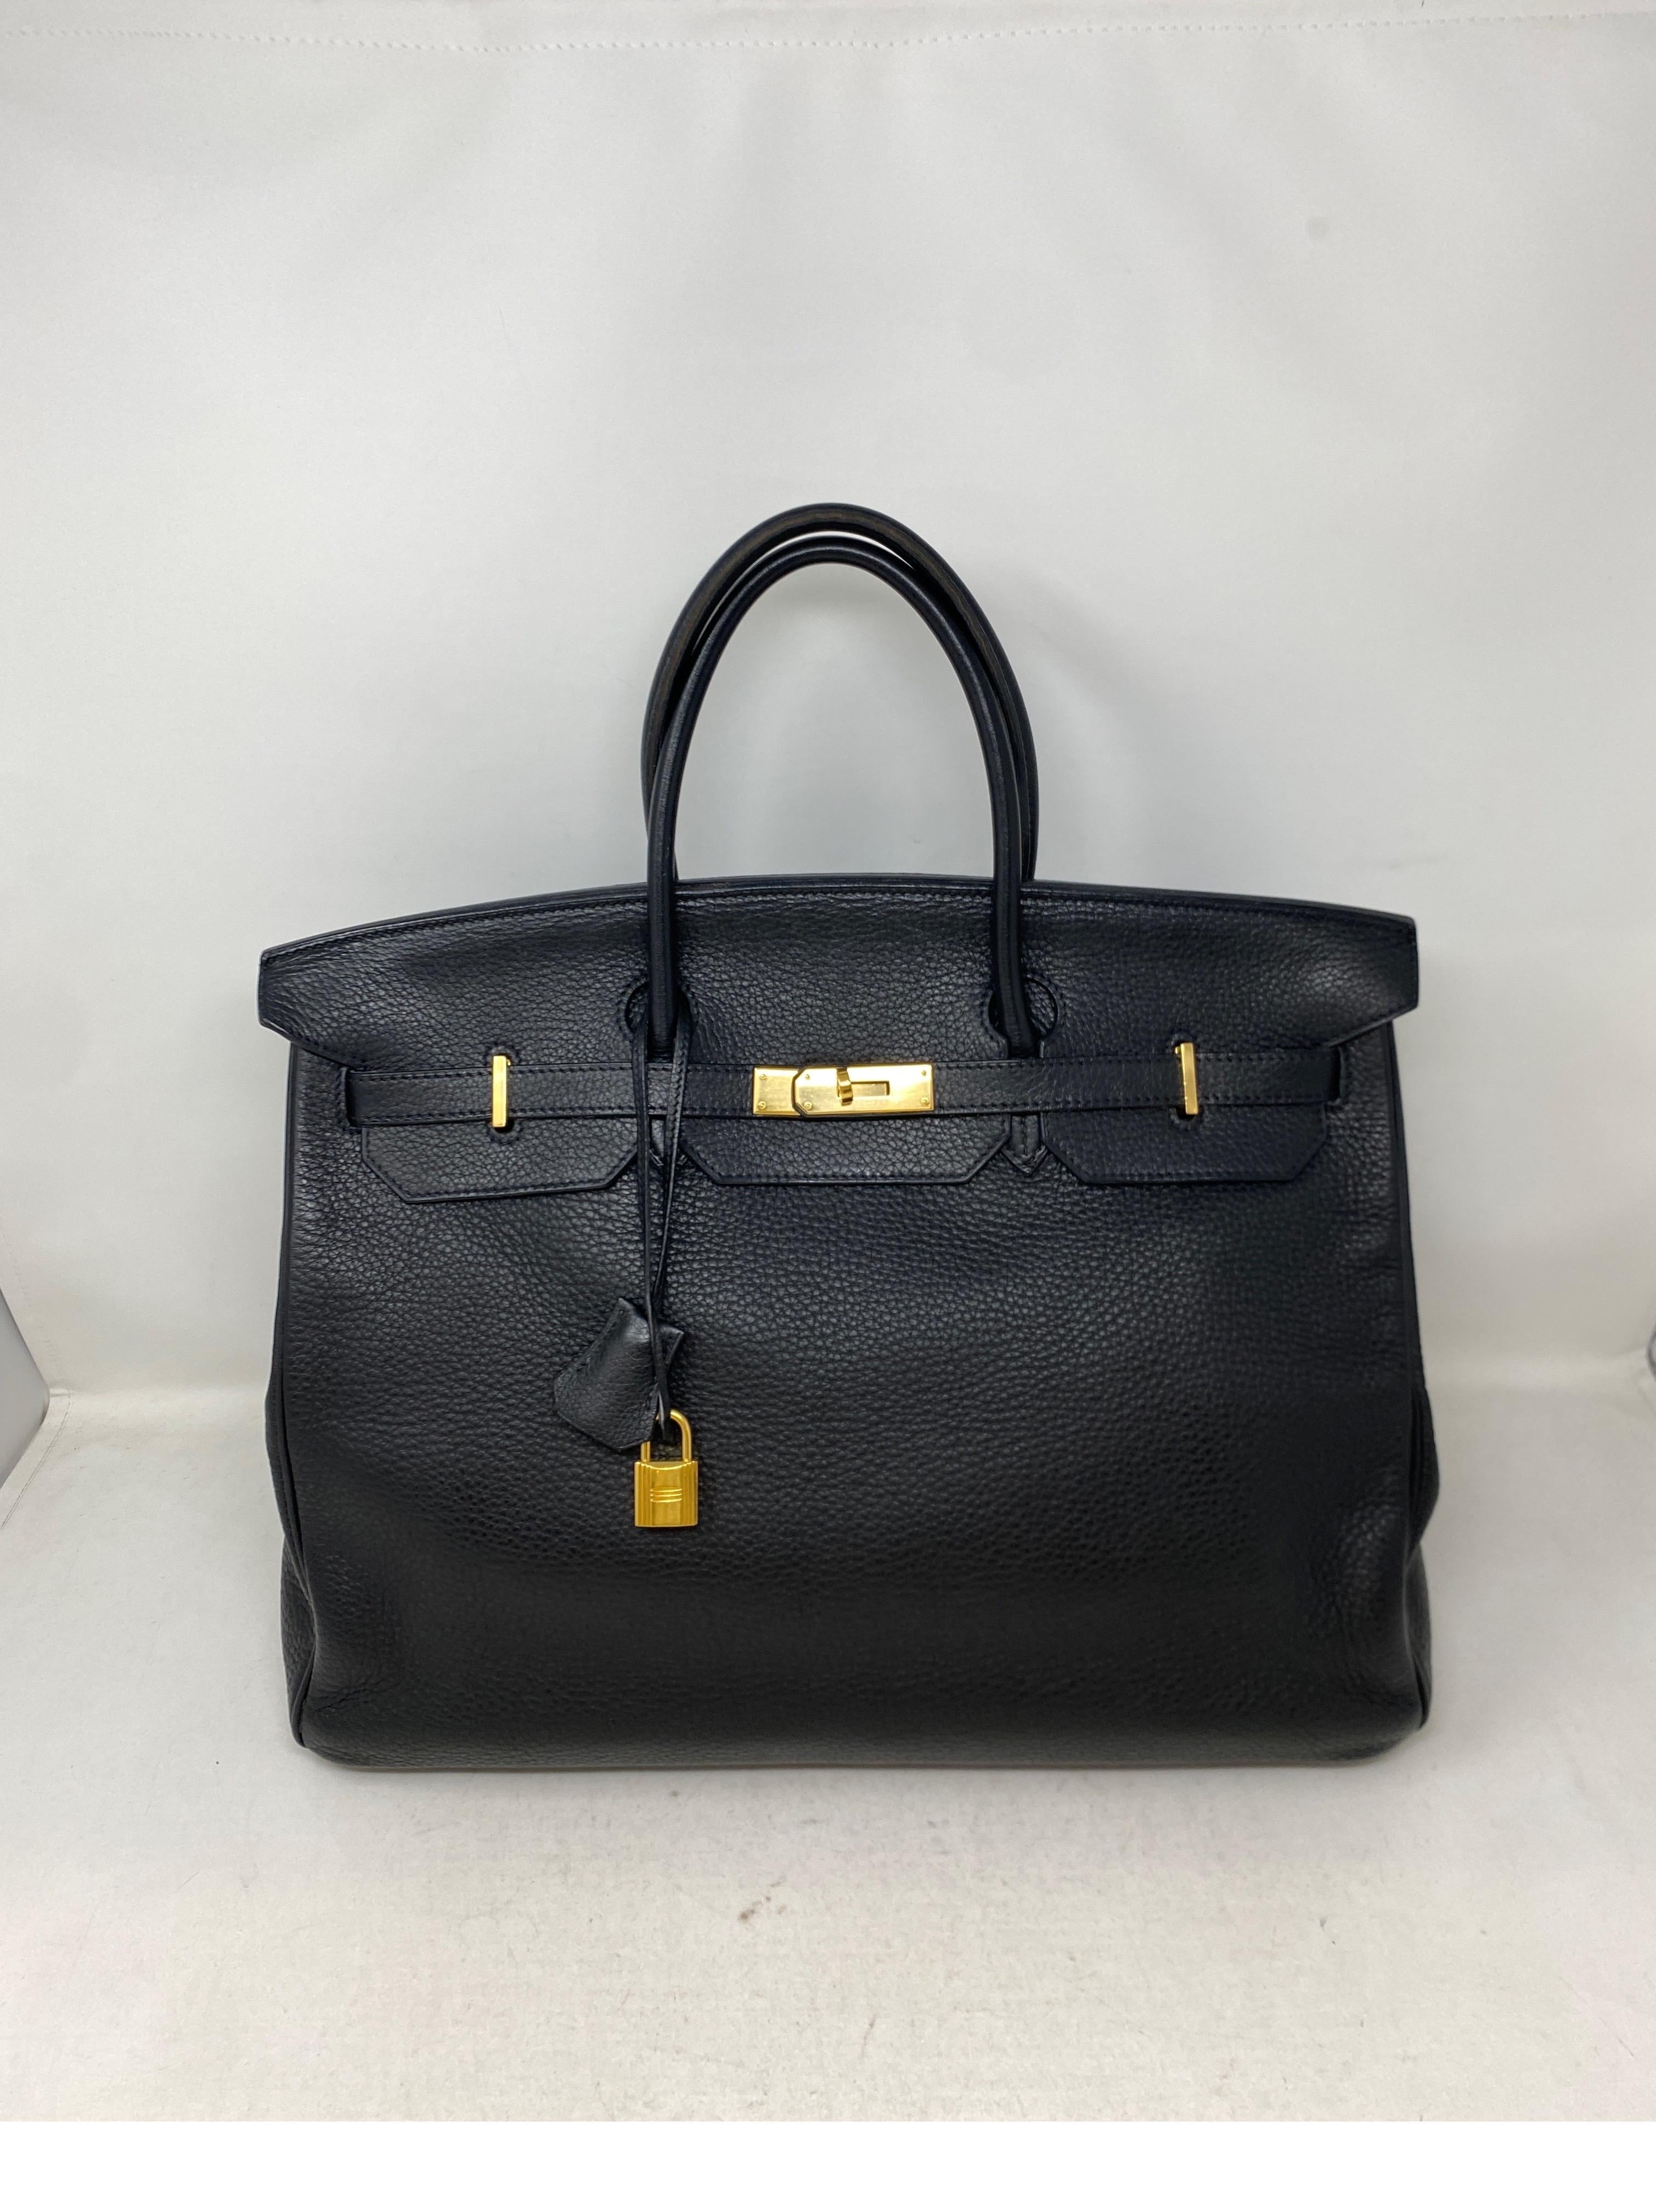 Hermes Black Birkin 40 Bag. Hard to find size 40 Birkin. Great as a bag or as a travel piece. Computer and work bag. Black with gold hardware. Togo leather. Durable leather. Good condition. Light wear on handles. Interior clean. Don't miss out on